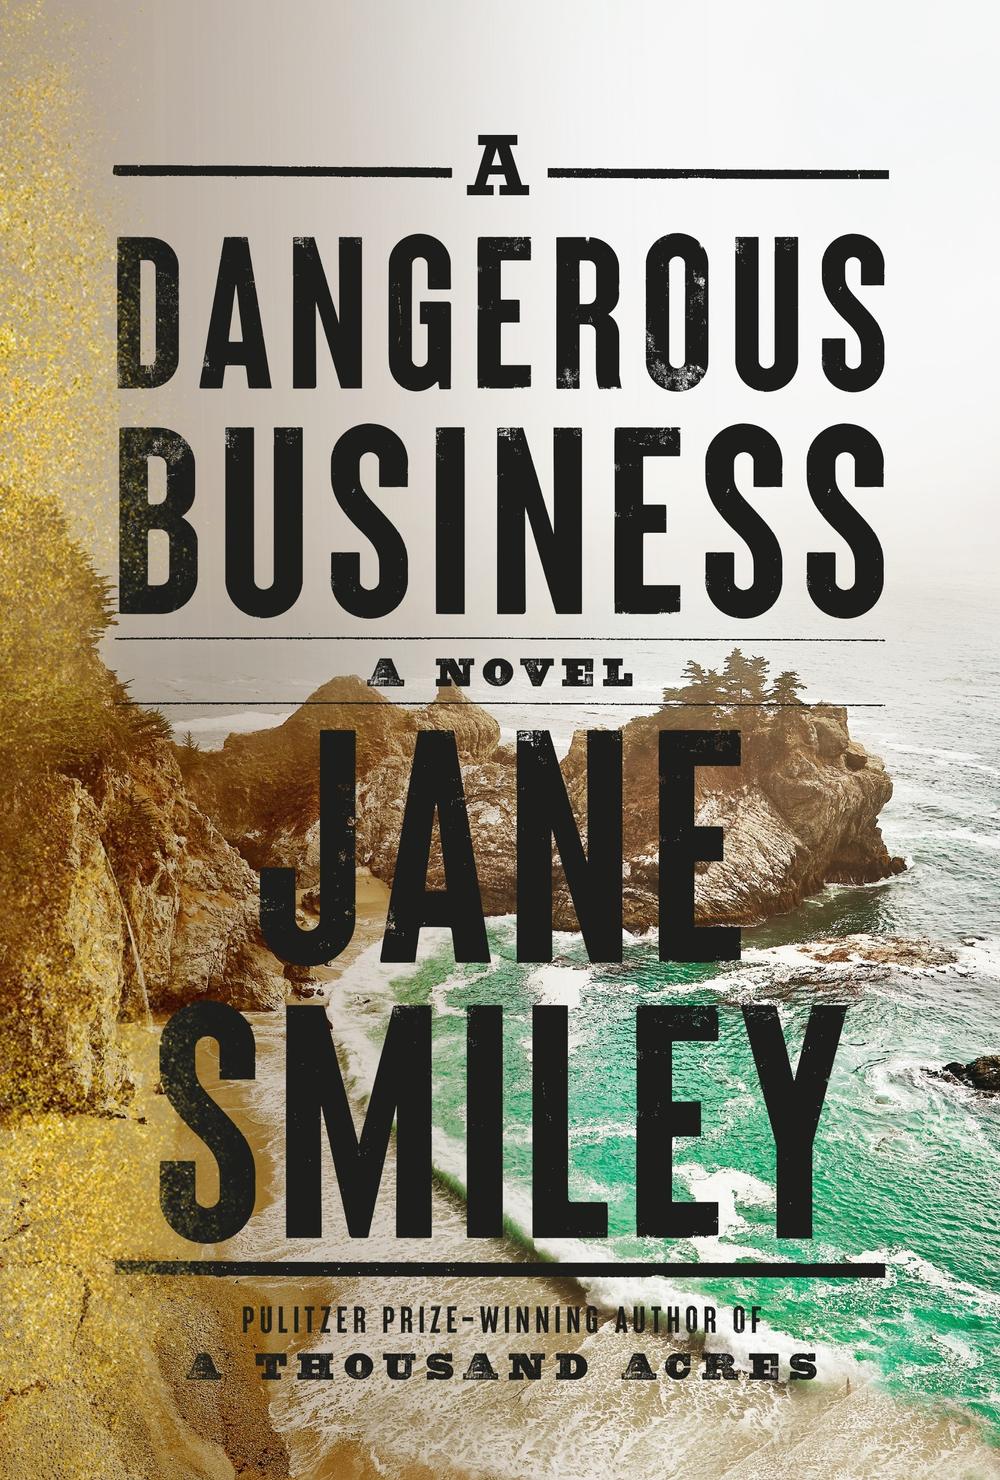 A Dangerous Business, by Jane Smiley